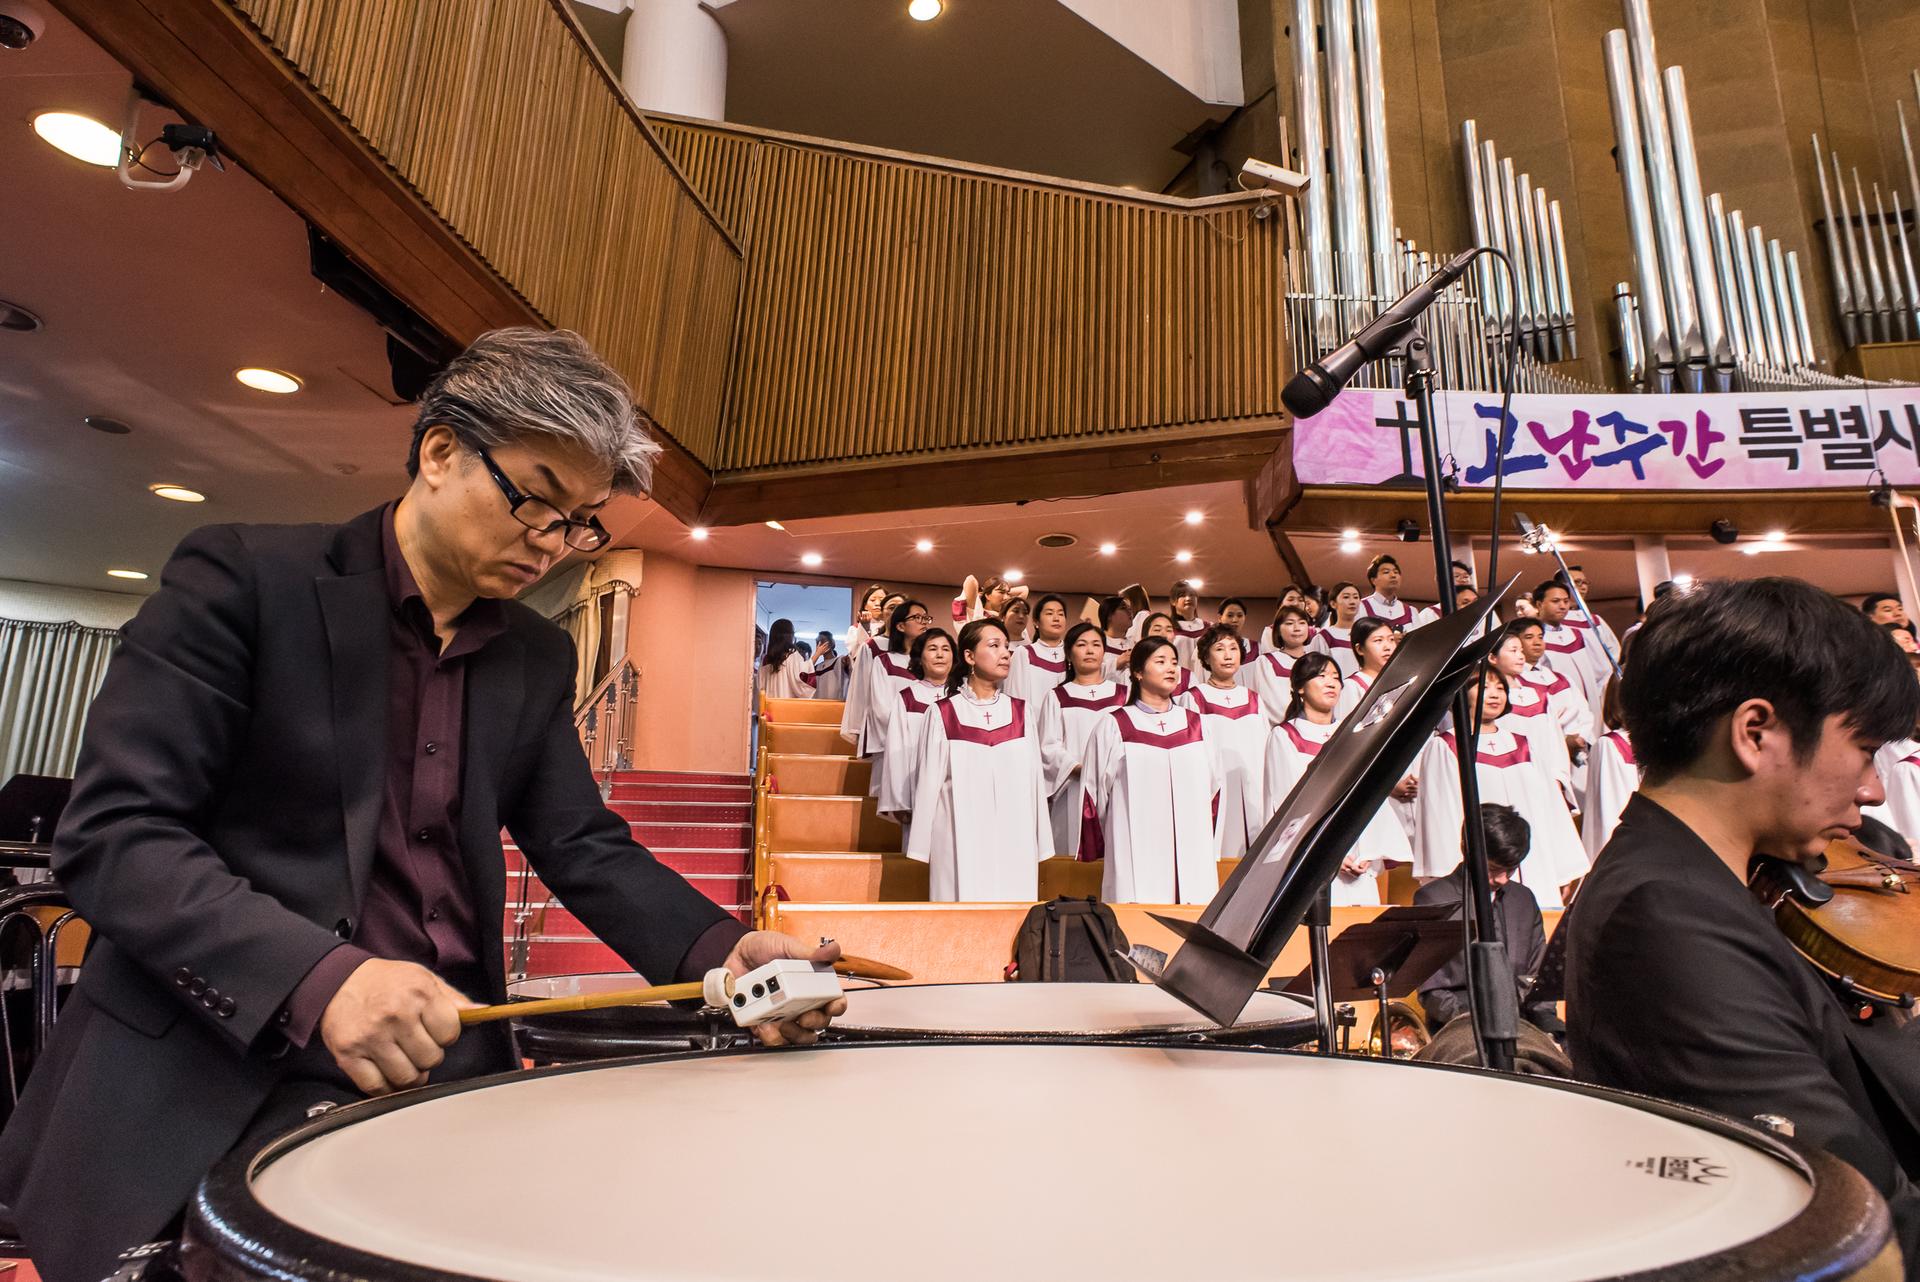 The message at Yoido Full Gospel Church is about faith, the Bible, and prosperity. The music is provided by a professional choir and a full orchestra.